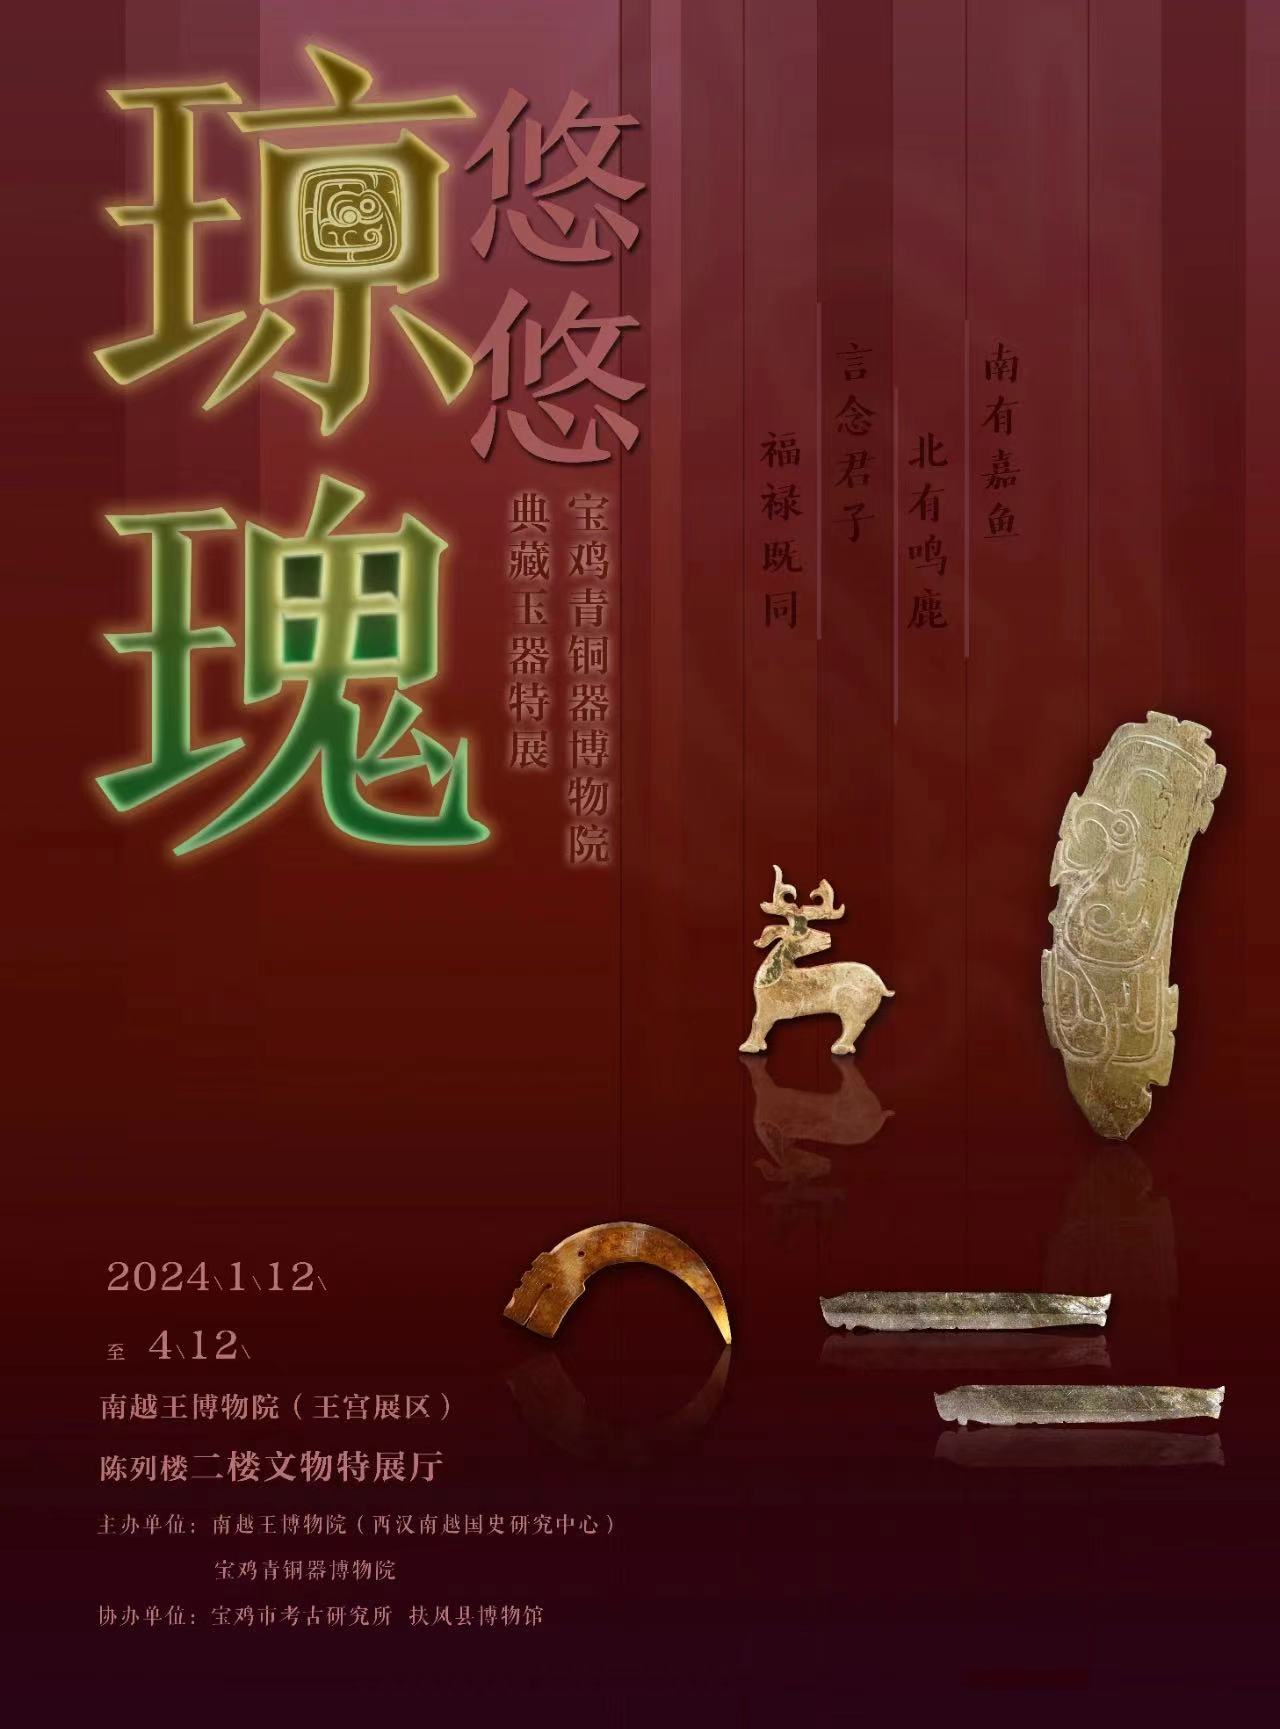 Special-Exhibition-of-Jade-Artifacts-from-the-Collection-of-the-Baoji-Bronze-Museum.jpg